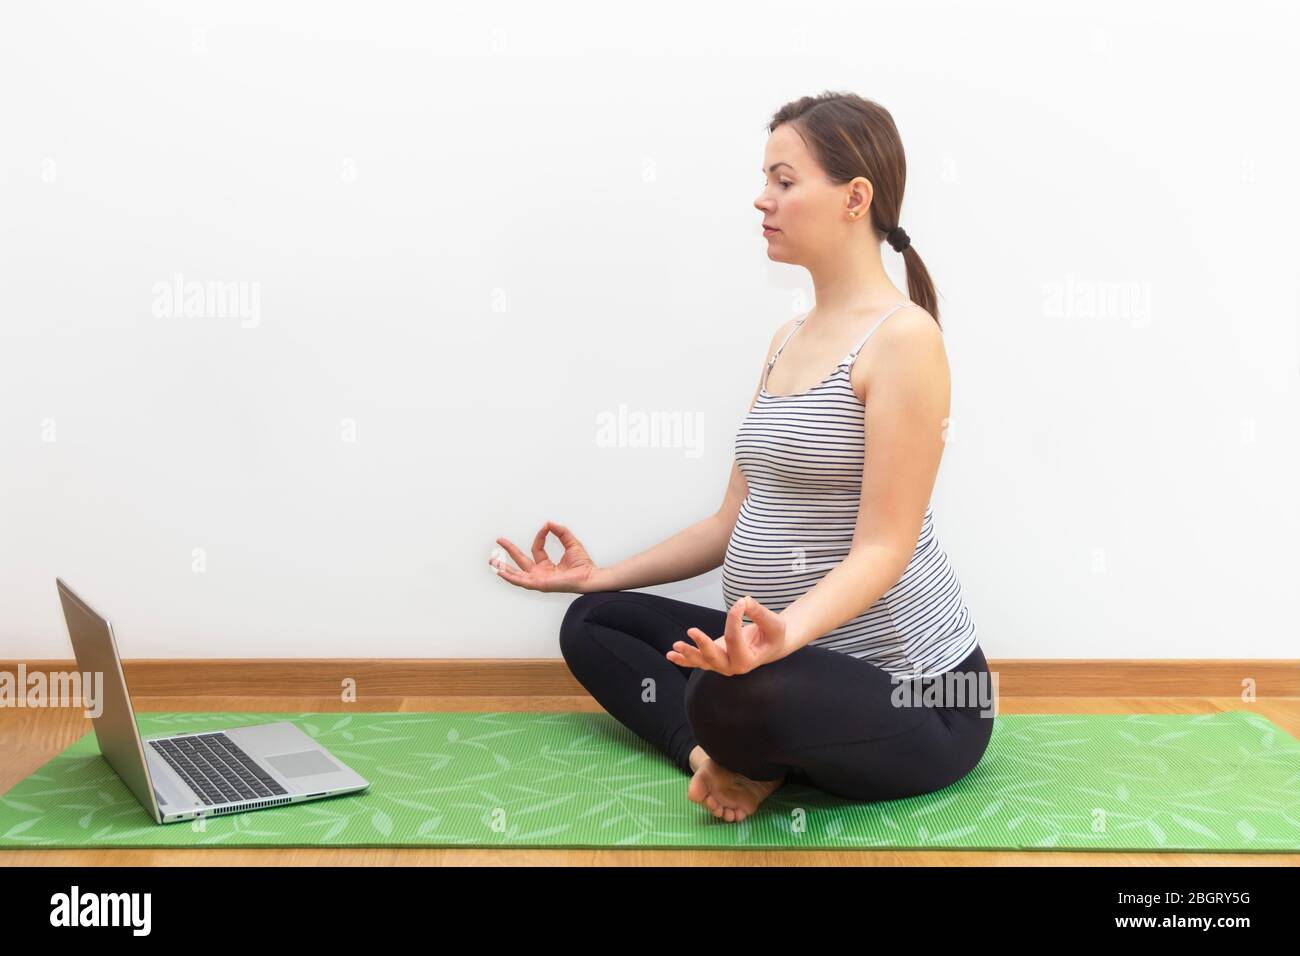 Pregnancy yoga at home during home quarantine, self-quarantine concept. Young pregnant woman practicing yoga online at home with notebook Stock Photo